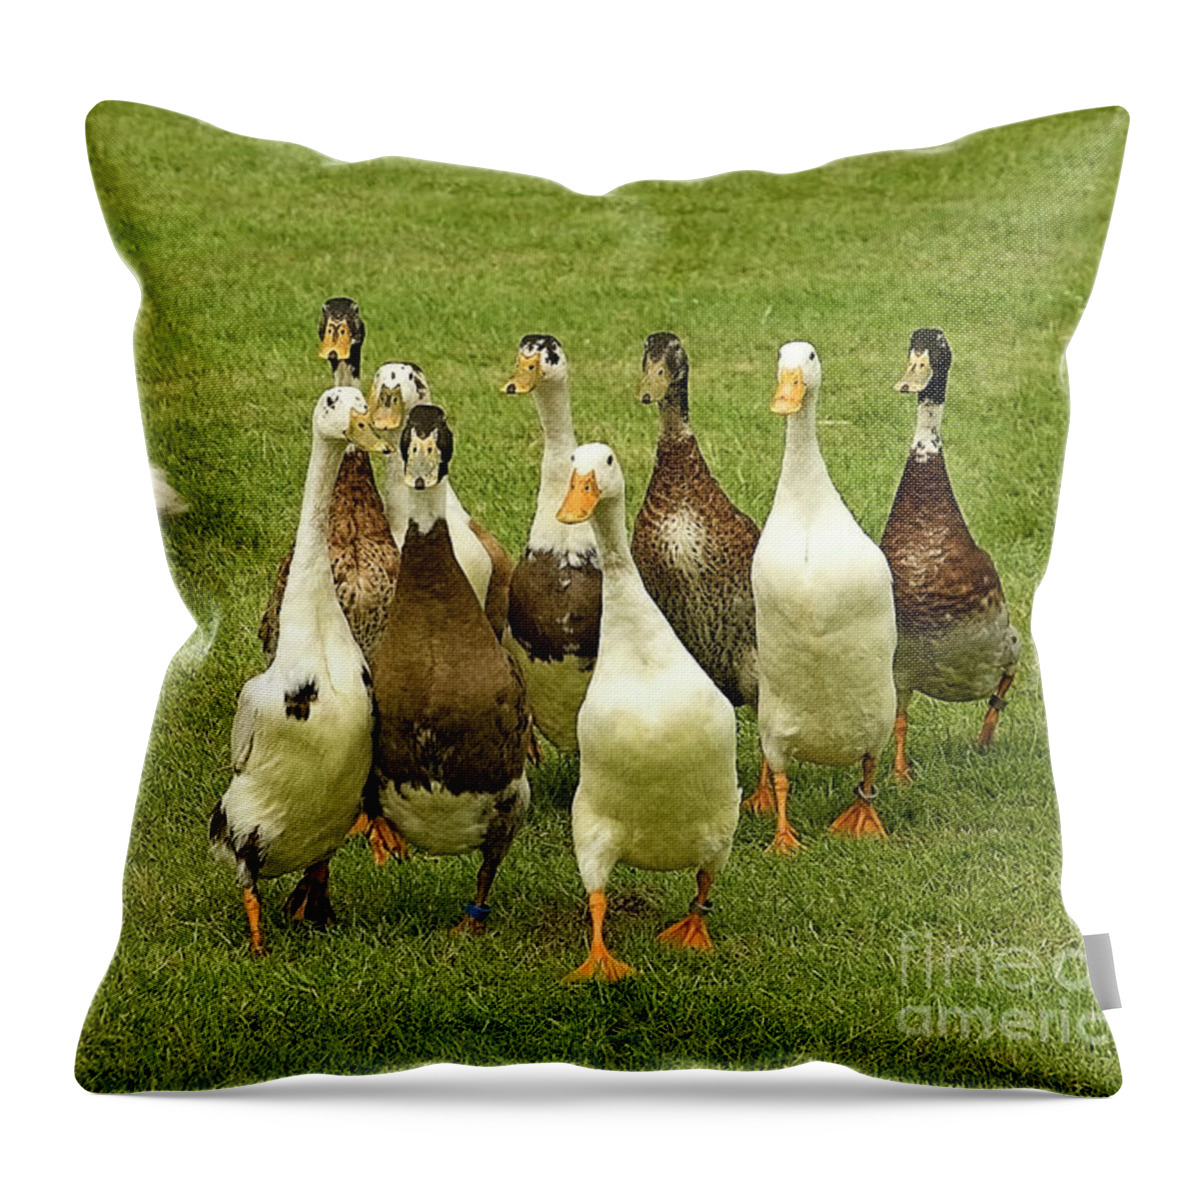 Geese Guarding Guard Gees-dog Smile Humor Funny Pastoral Leader Lead Country Village Field Grass Green Farm Farming Animals Sheepdog Herd Flock Nine Together Cheer Up Cheerful Day Summer Optimistic Lifting Up Grazing Crossing Walking Throw Pillow featuring the photograph The Best Gees Guard by Tatiana Bogracheva